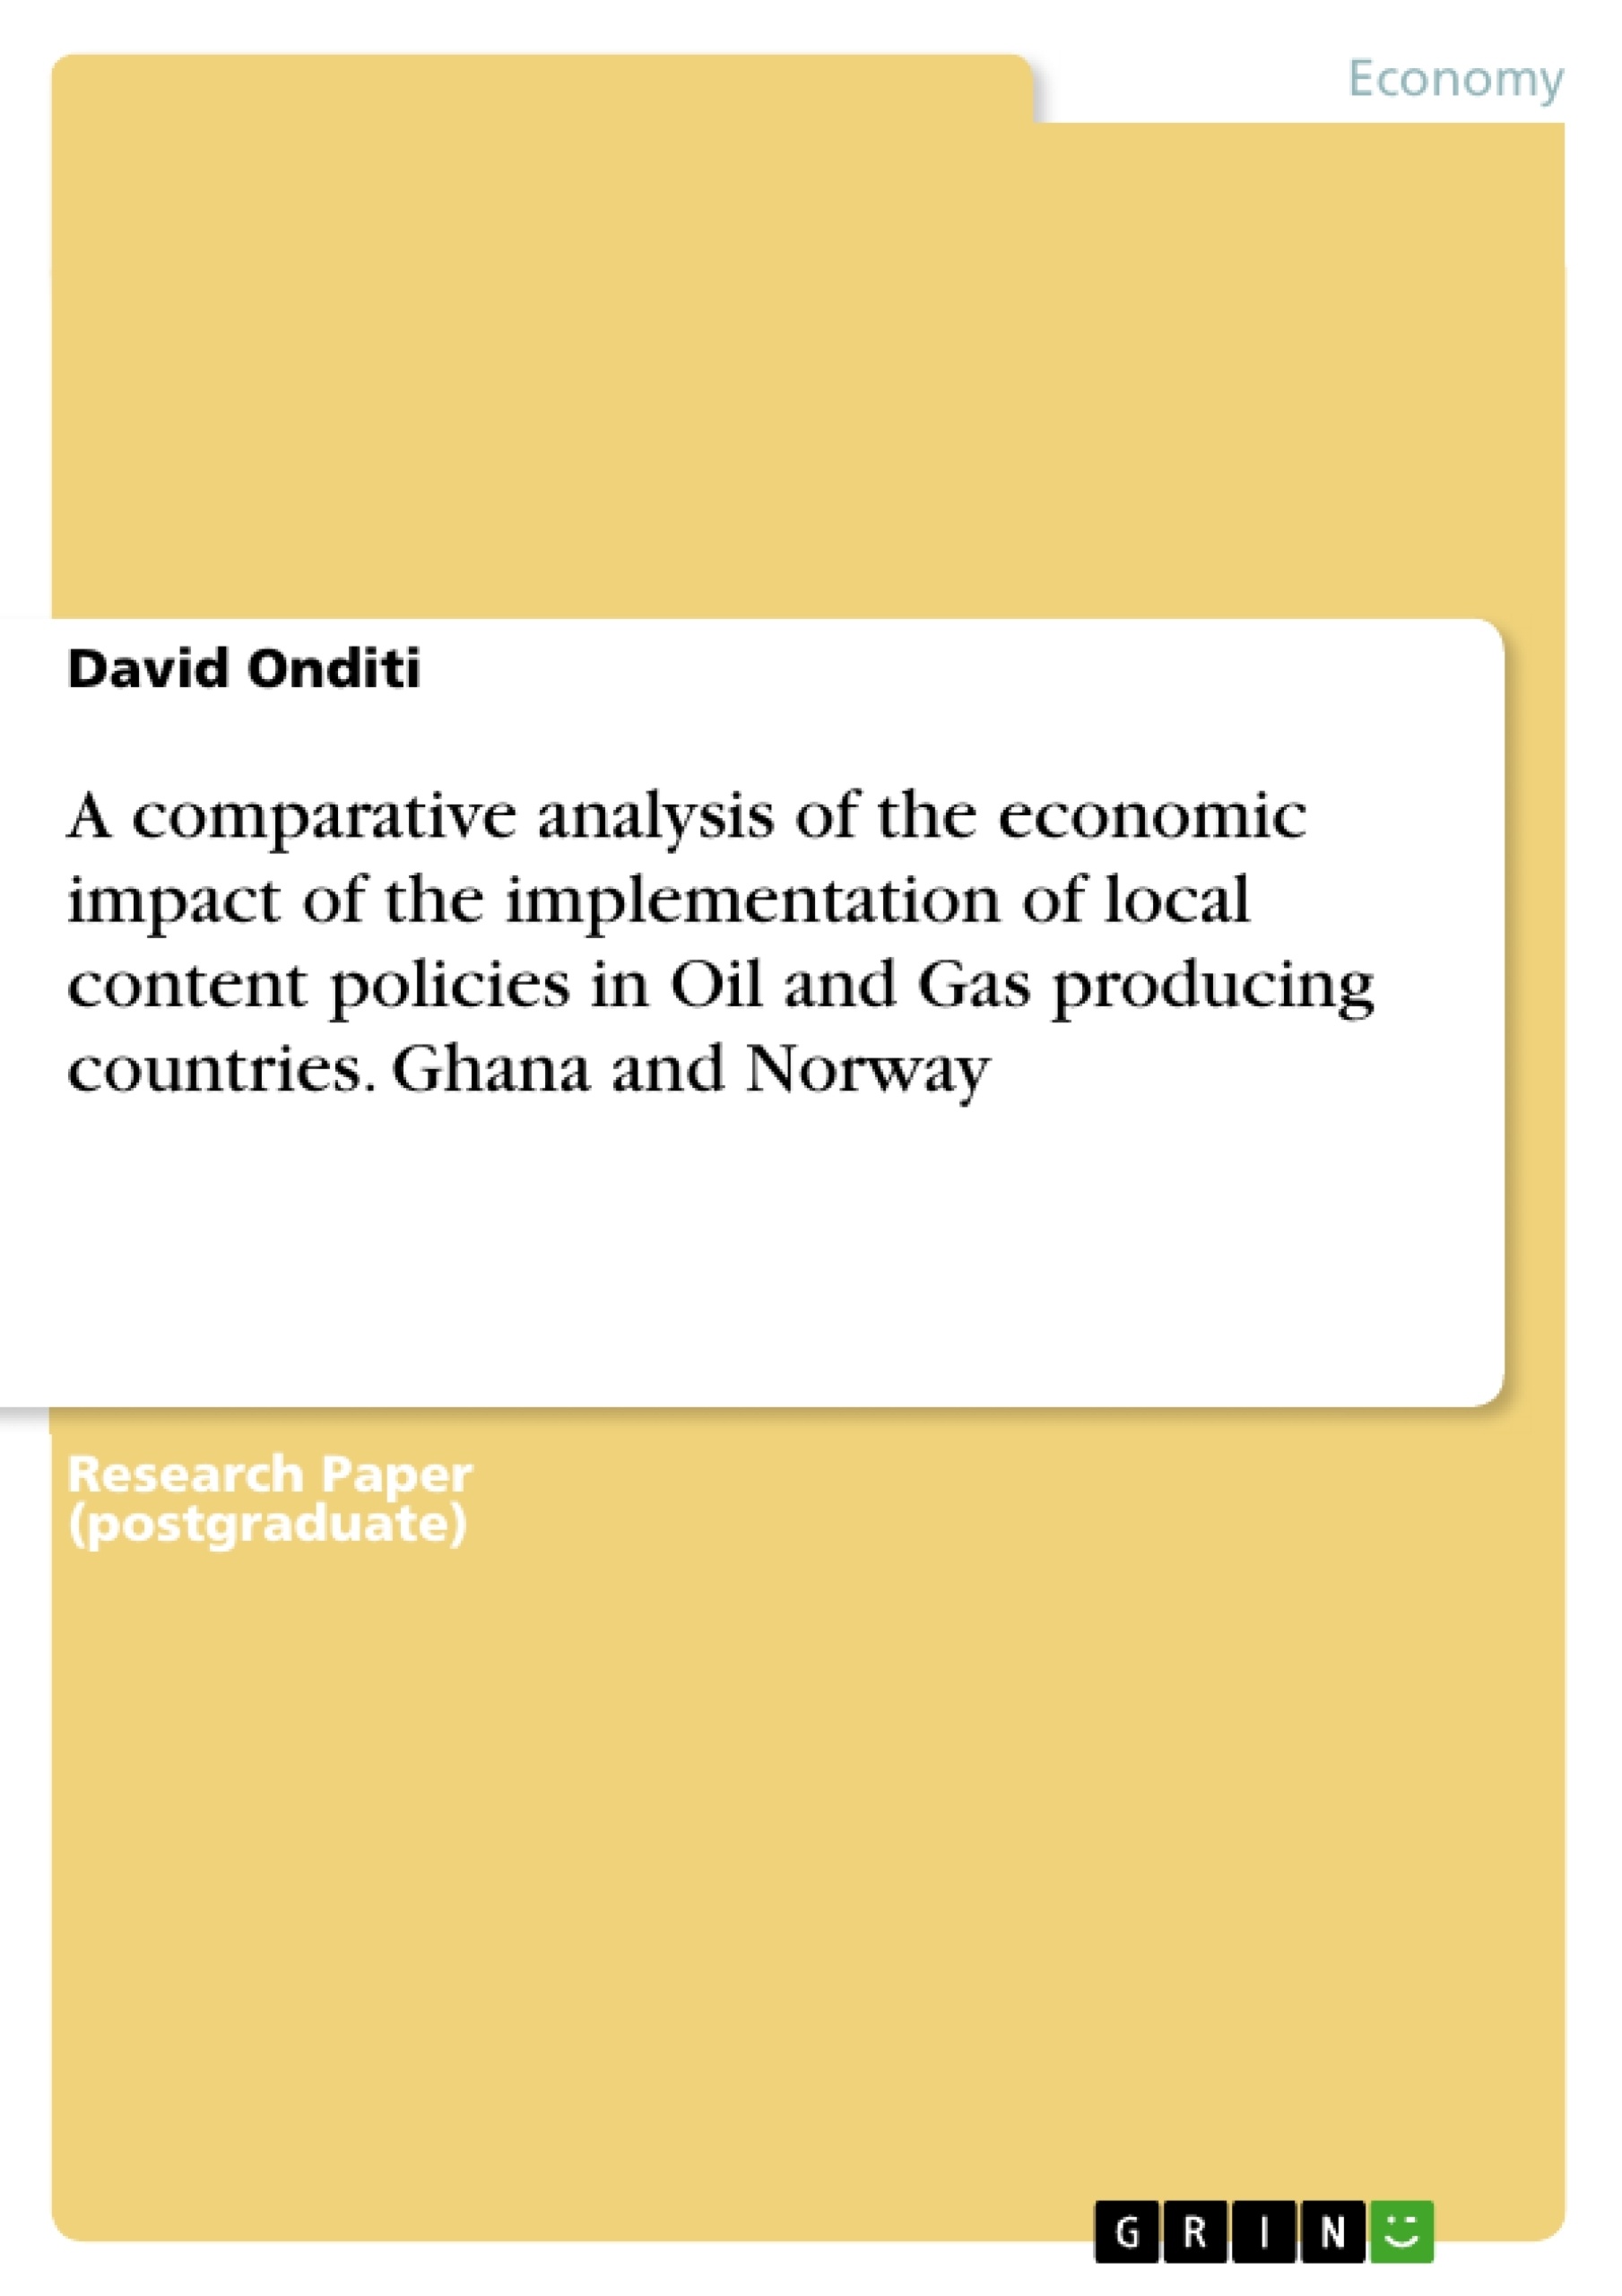 Title: A comparative analysis of the economic impact of the implementation of local content policies in Oil and Gas producing countries. Ghana and Norway